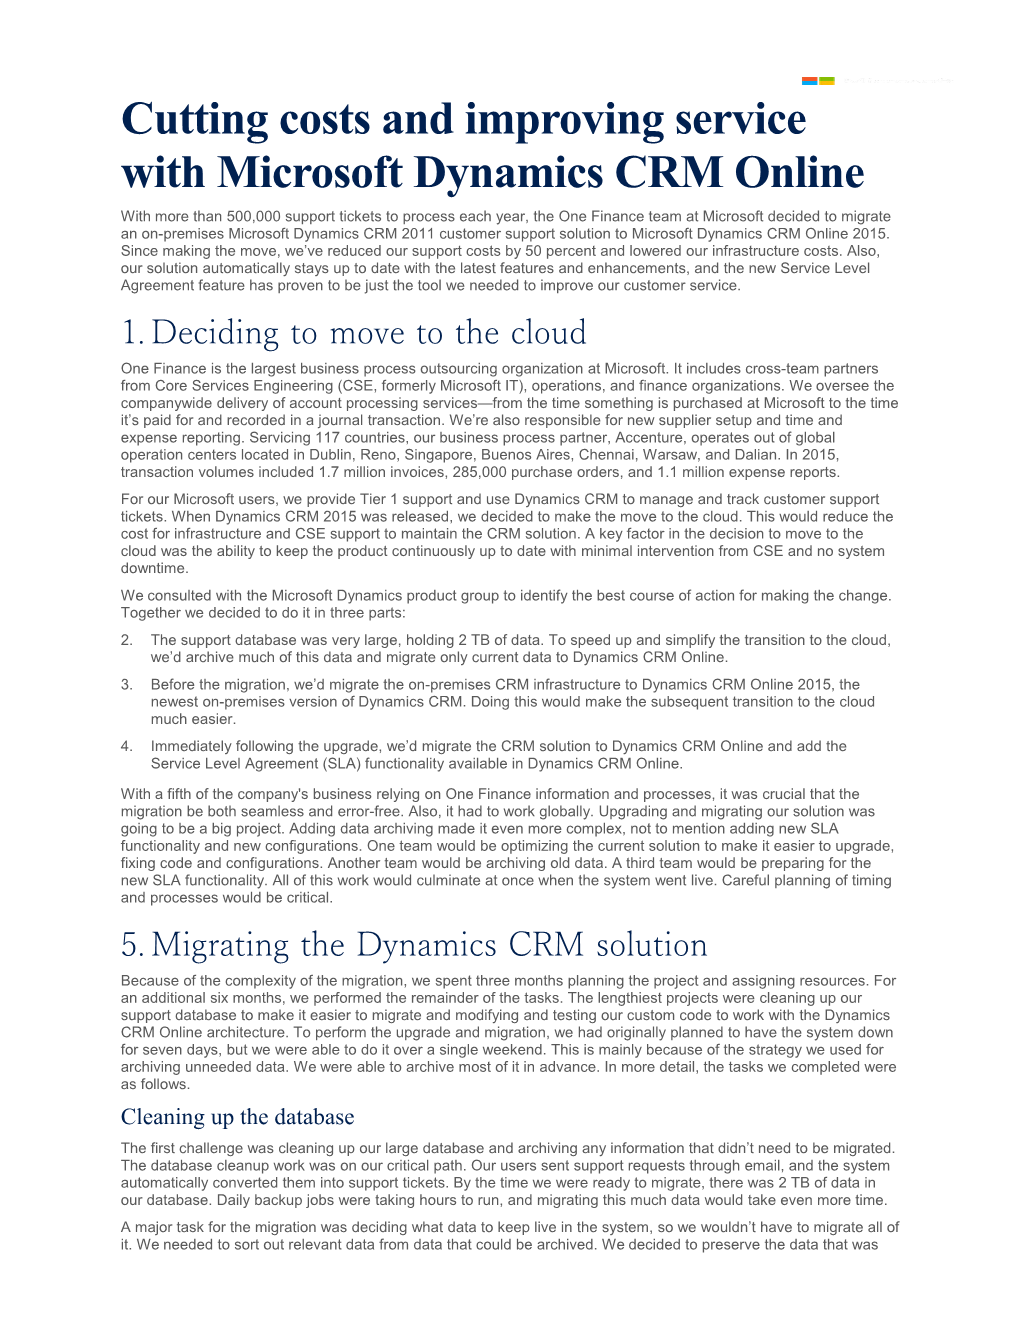 Cutting Costs and Improving Service with Microsoft Dynamics CRM Online